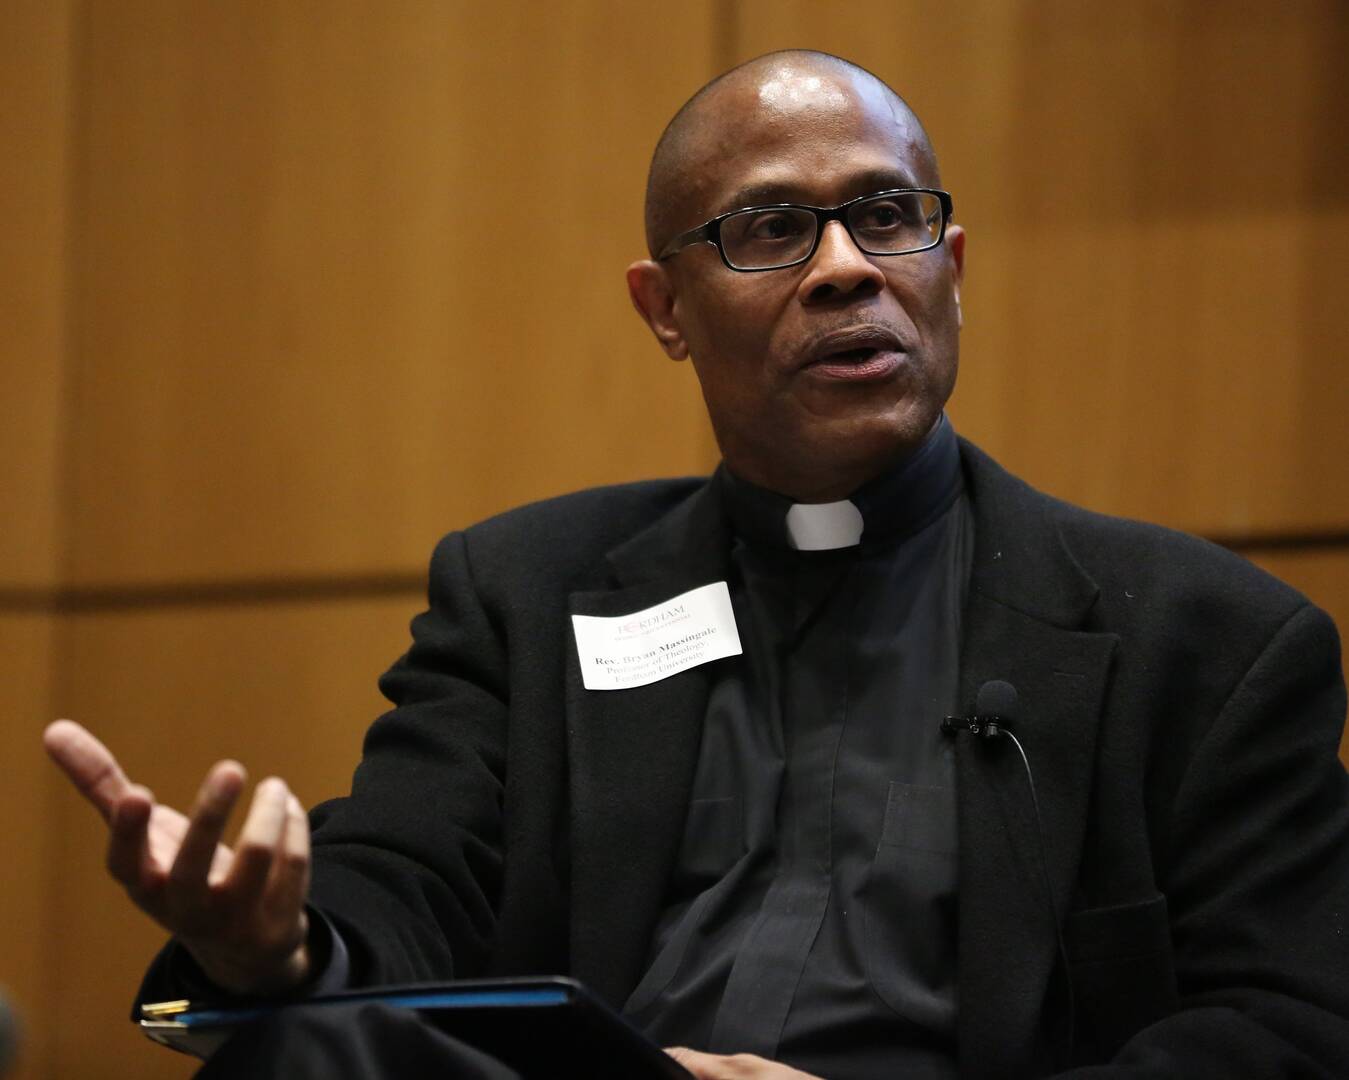 The Rev. Bryan Massingale, a theology professor at Fordham University in New York, speaks during a 2017 panel discussion in New York in 2017. (CNS photo/Bruce Gilbert, Fordham University)